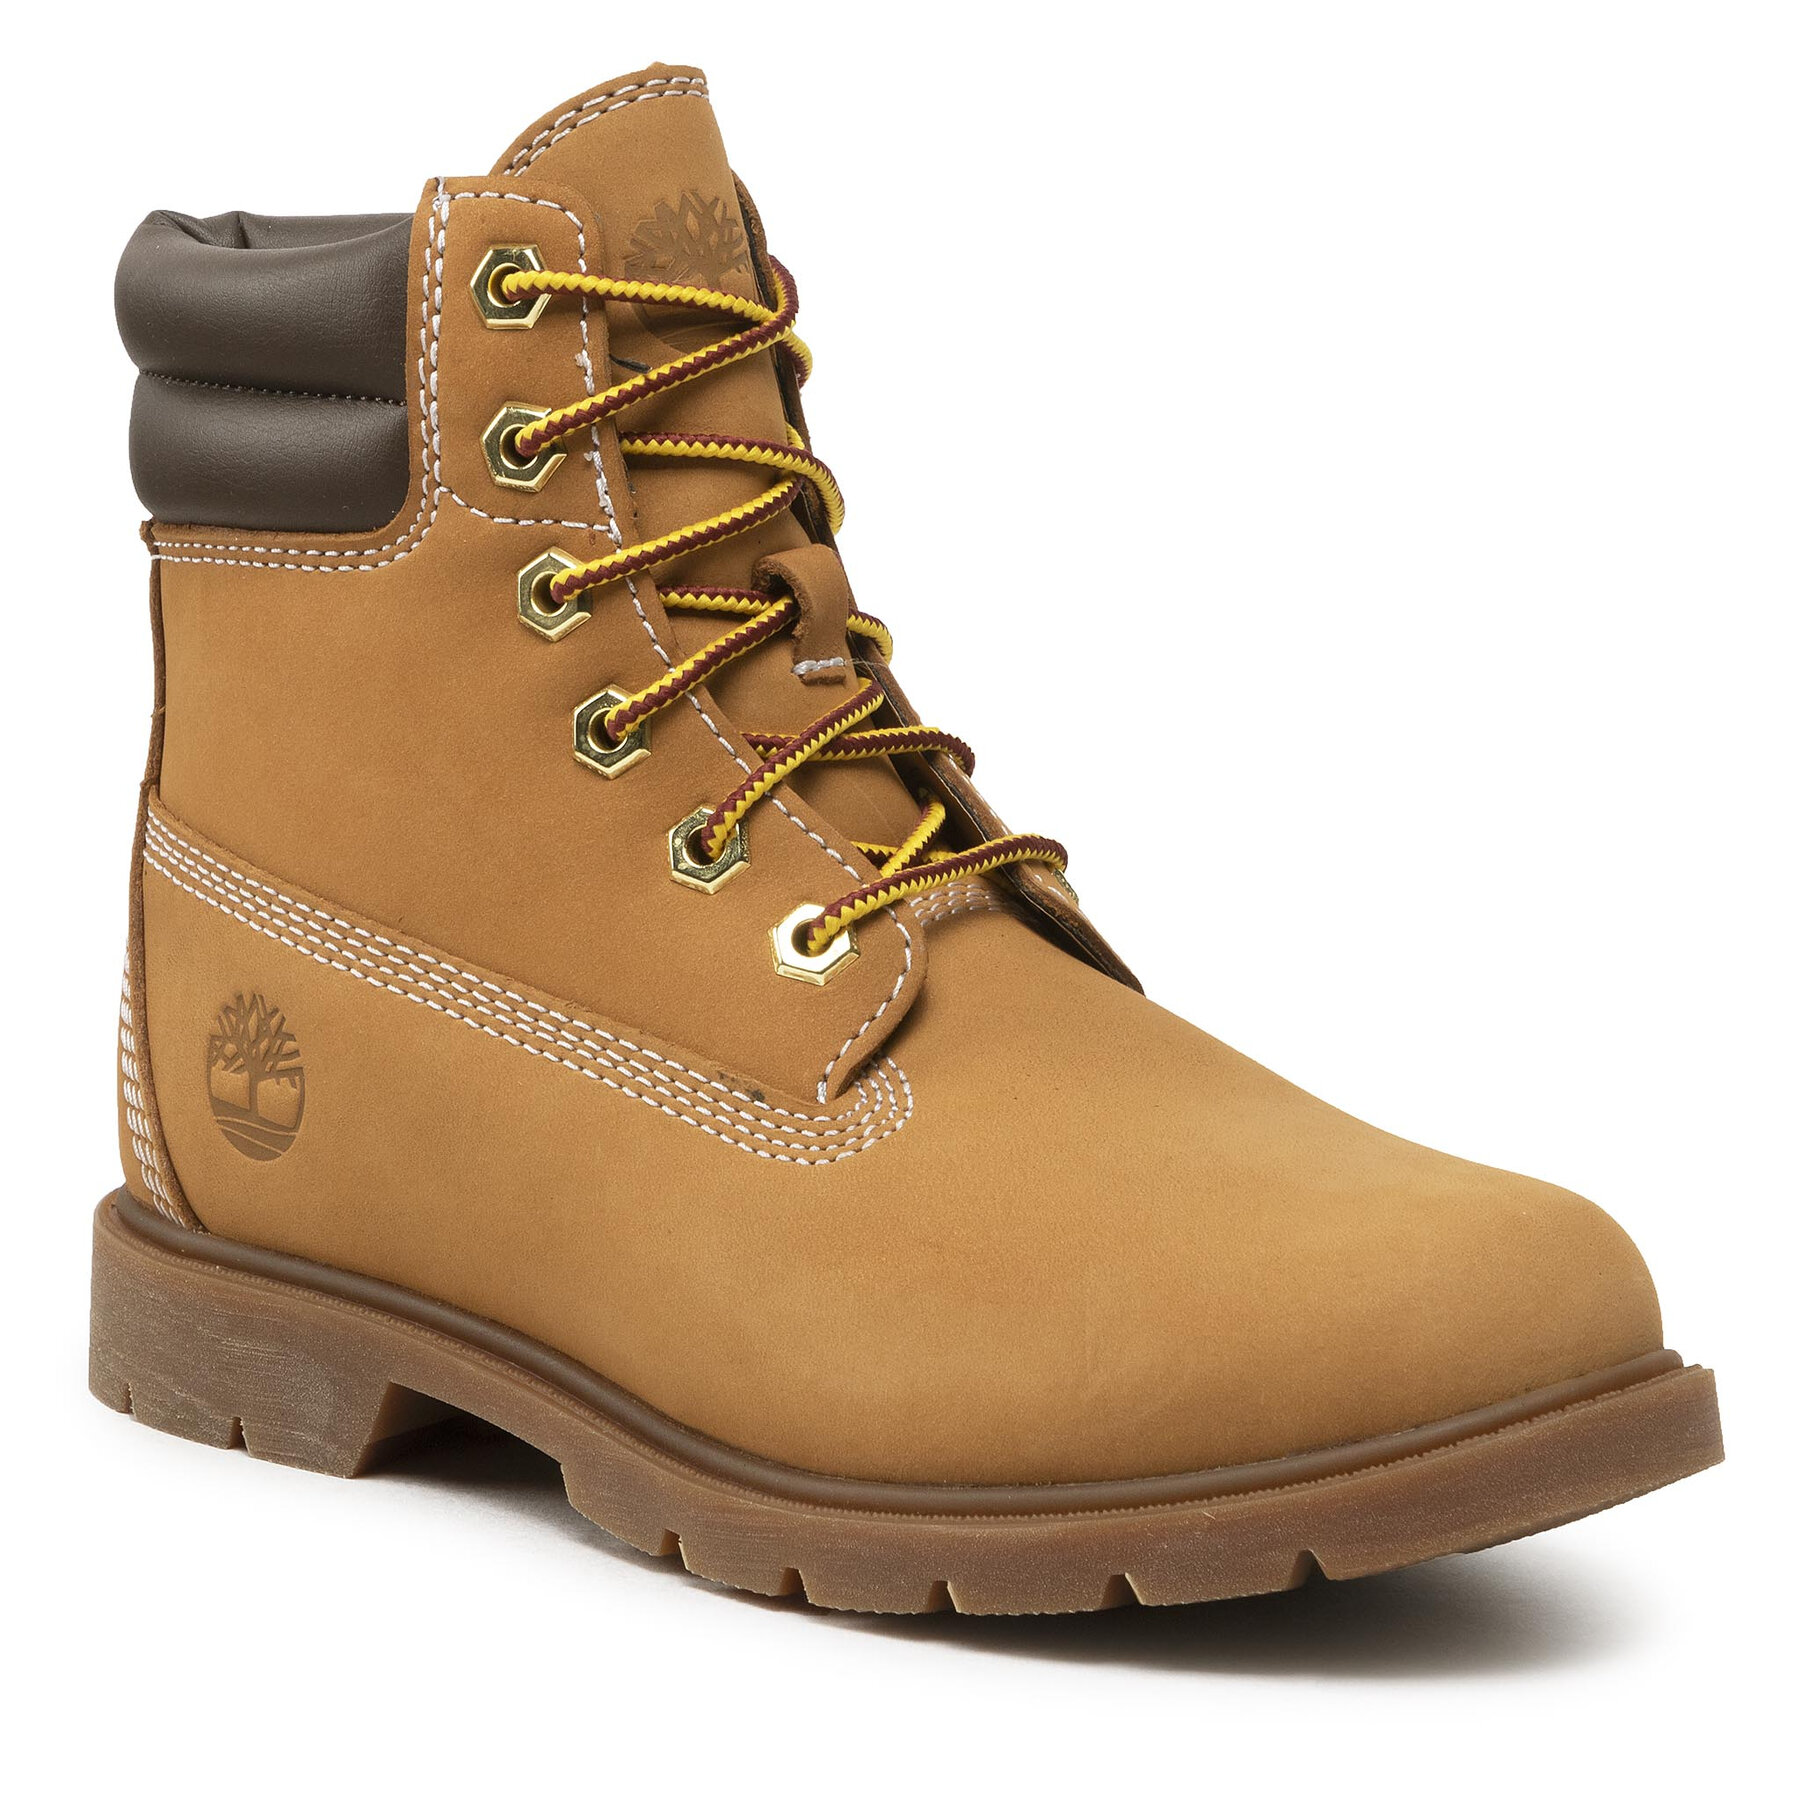 Trappers Timberland Linden Woods 6in Wr Basic TB0A2KXH2311 Wheat Nubuck epantofi.ro imagine noua